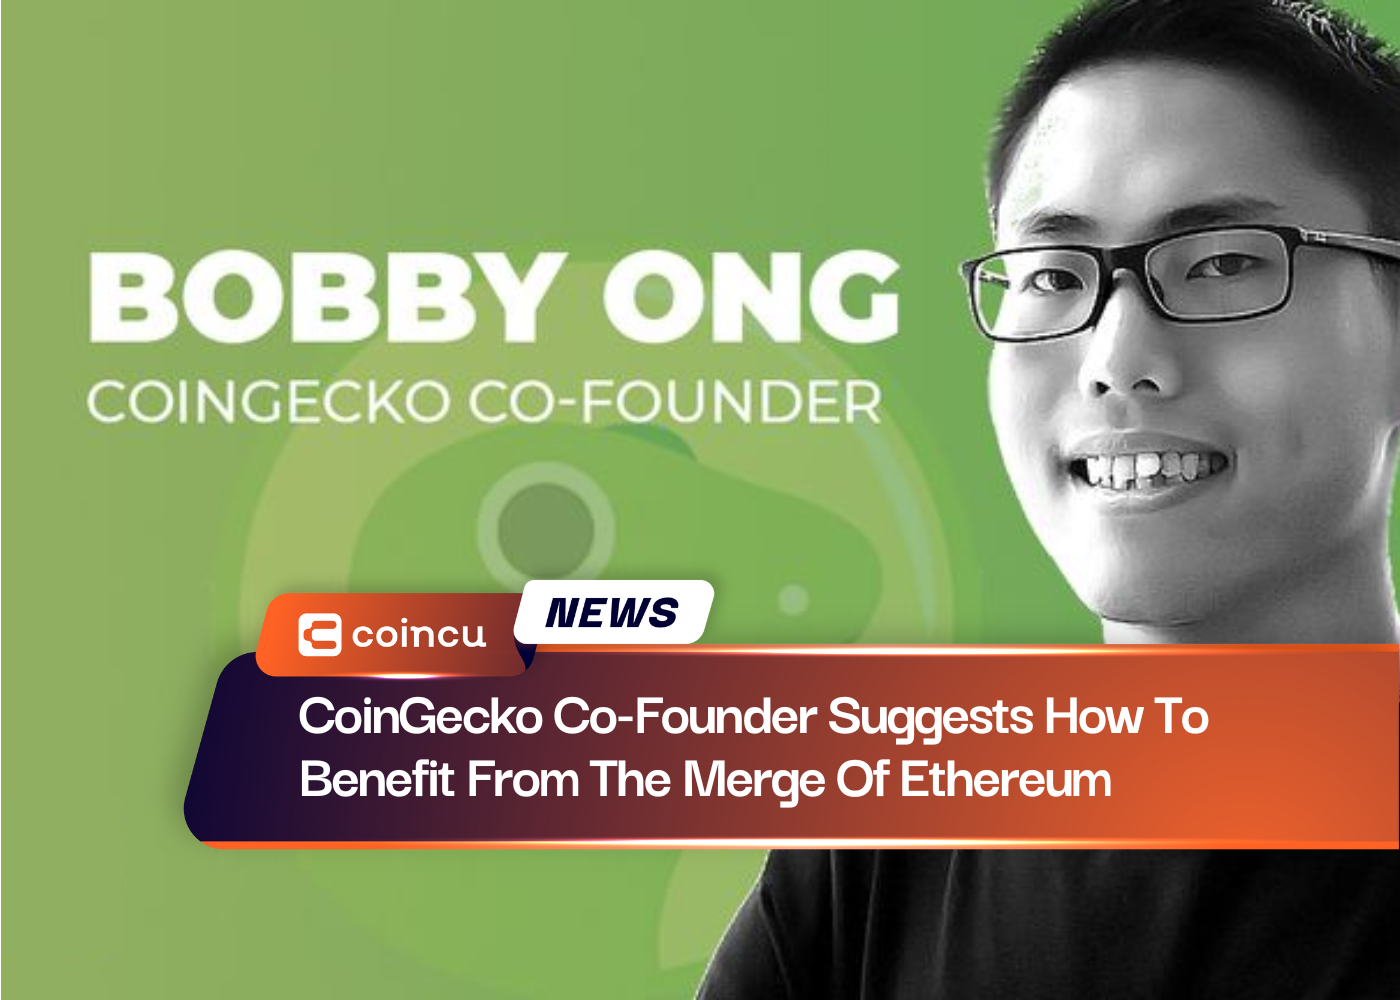 CoinGecko Co-Founder Suggests How To Benefit From The Merge Of Ethereum